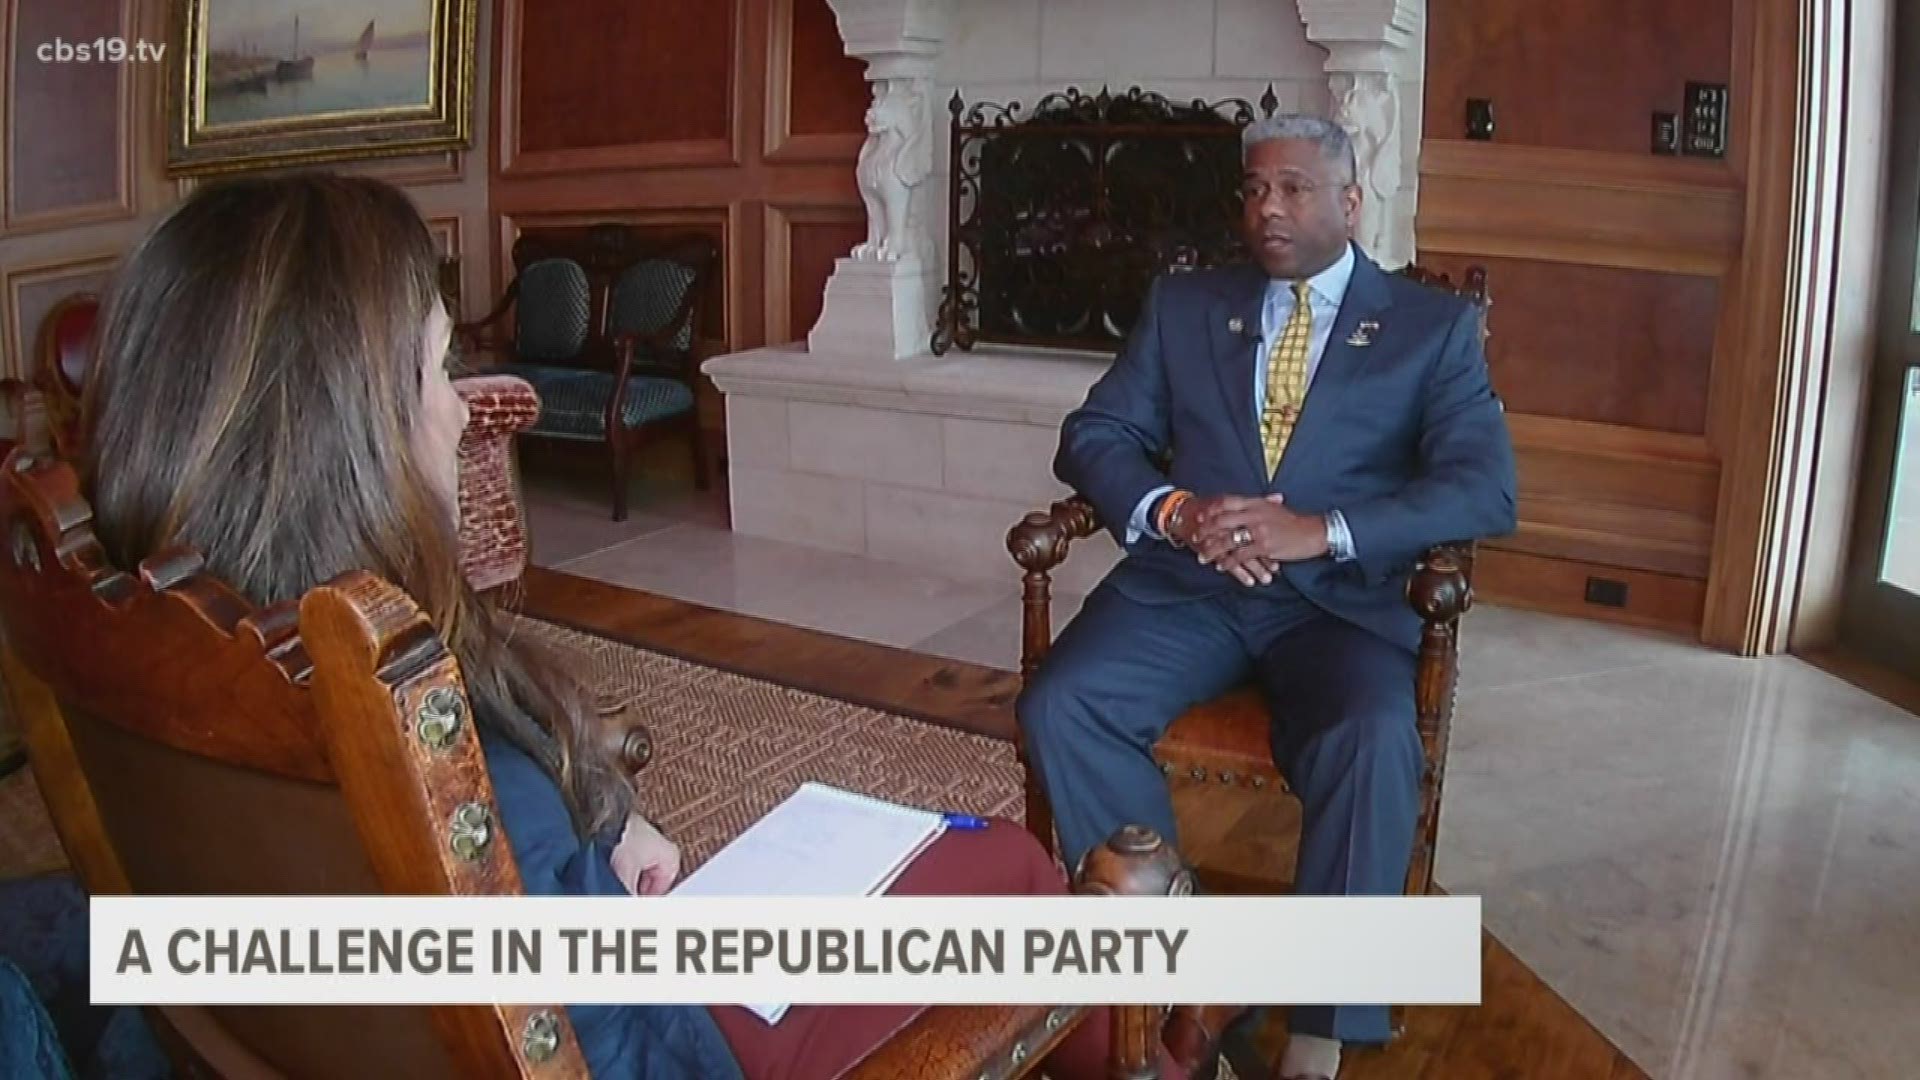 CBS19's Dana Hughey sat down for an exclusive interview with former Lt. Col. Allen B. West on his decision to run for Chairman of the Texas Republican Party.